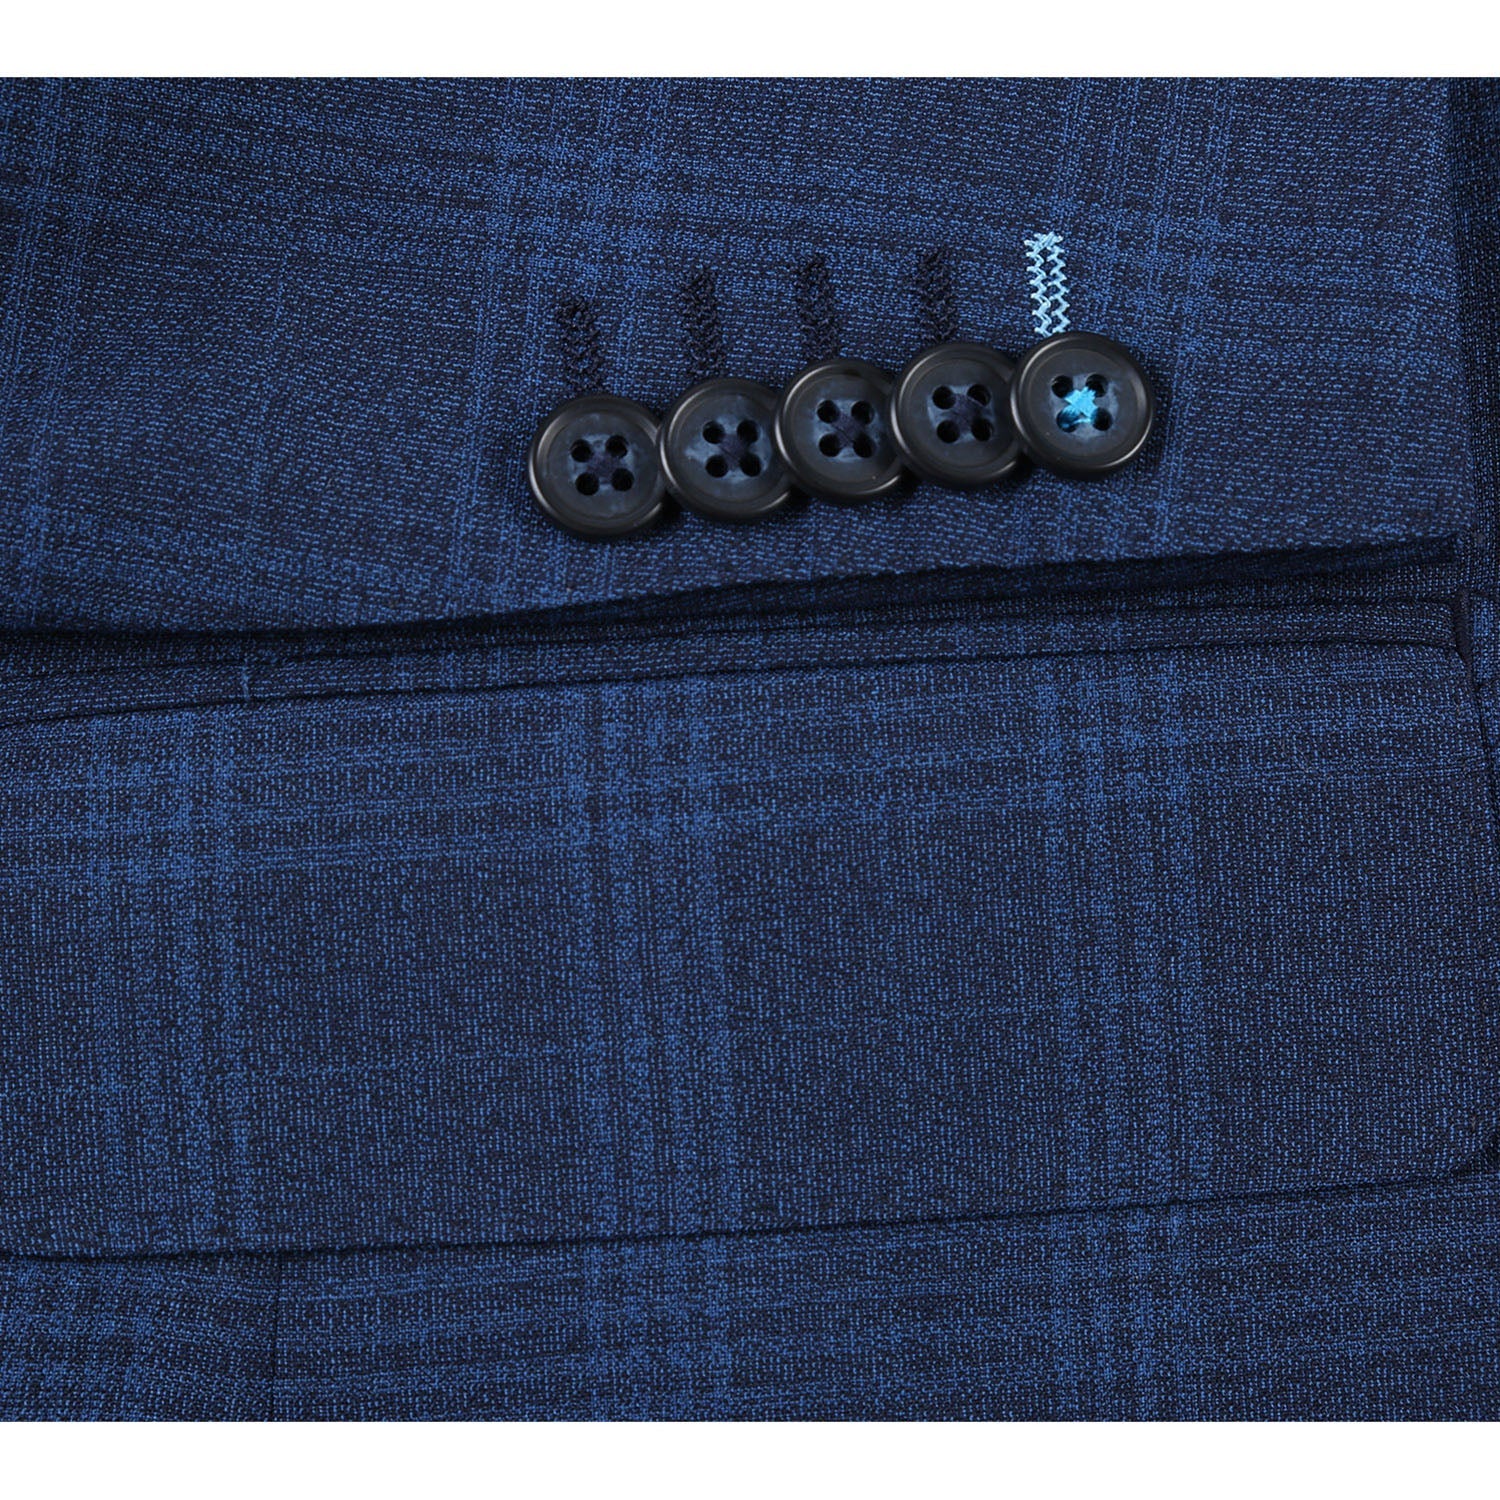 English Laundry Air Force Blue Plaid Wool Suit 8